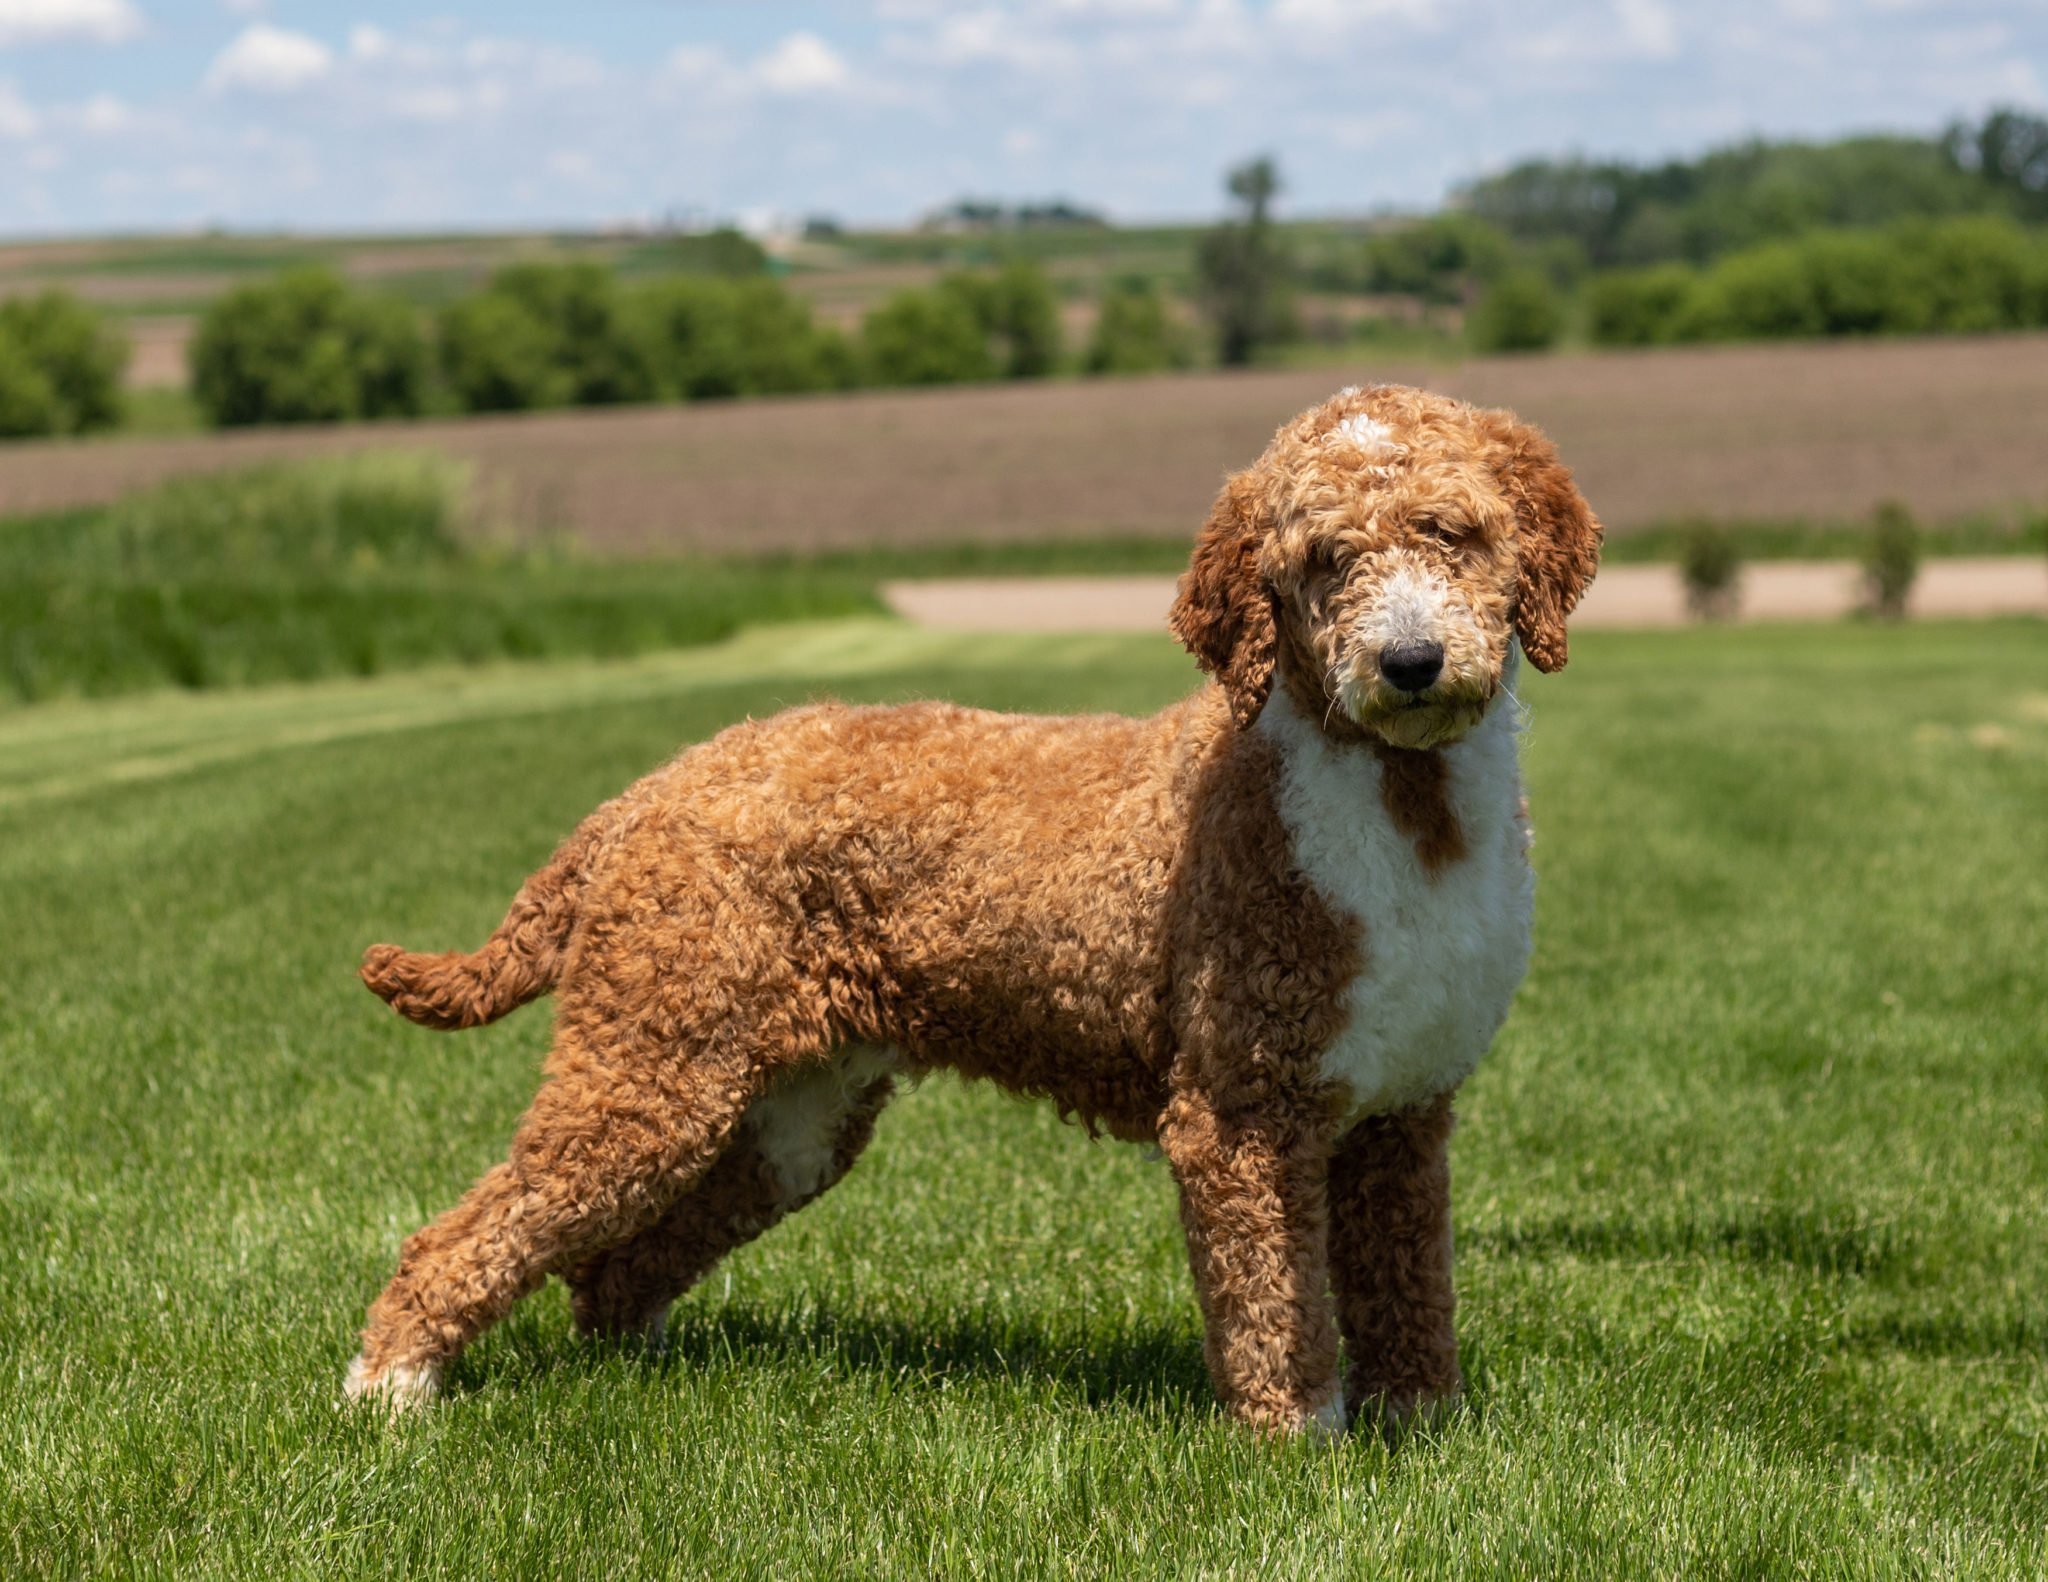 A litter of Mini Irish Doodles raised in Iowa by Poodles 2 Doodles